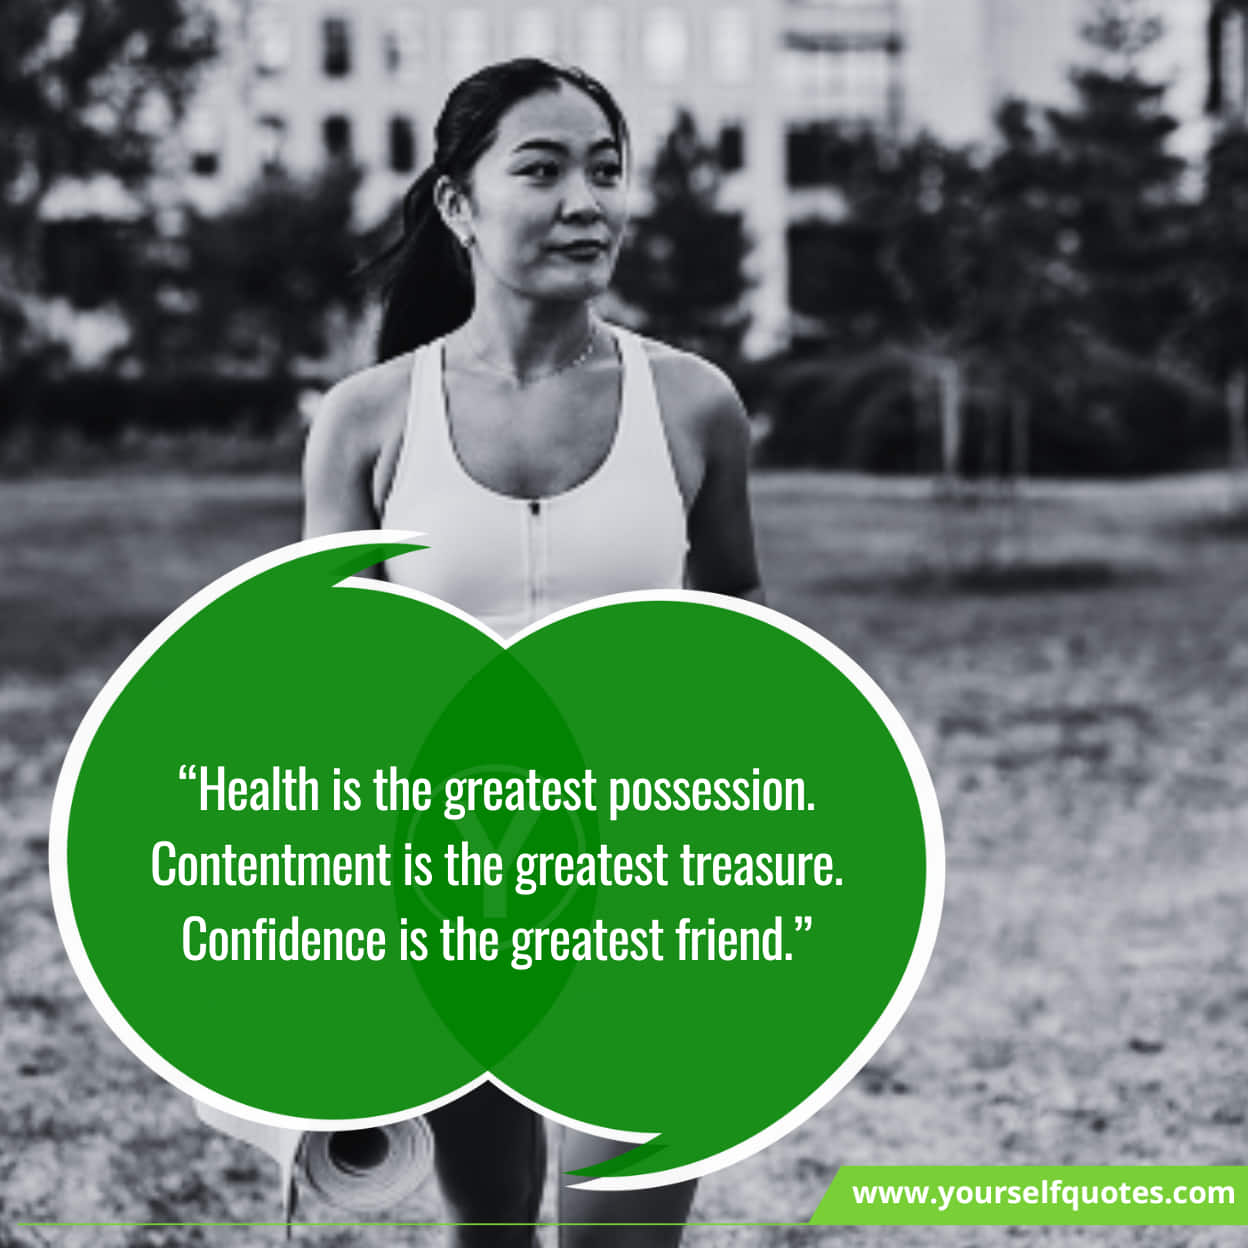 Best Quotes About Health